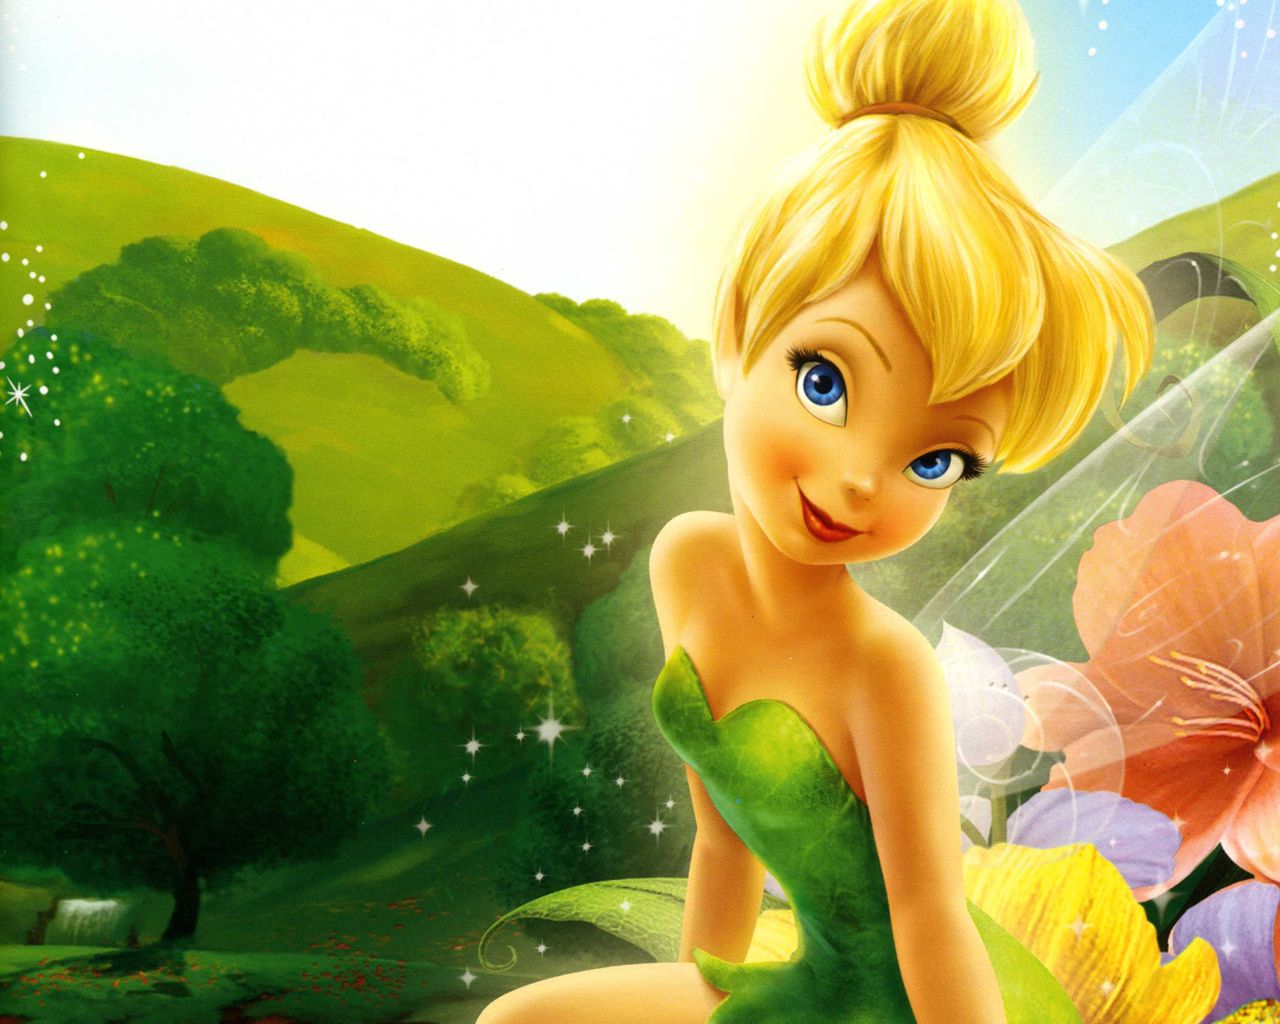 Find yourself a great Tinkerbell wallpaper with Disney fairies